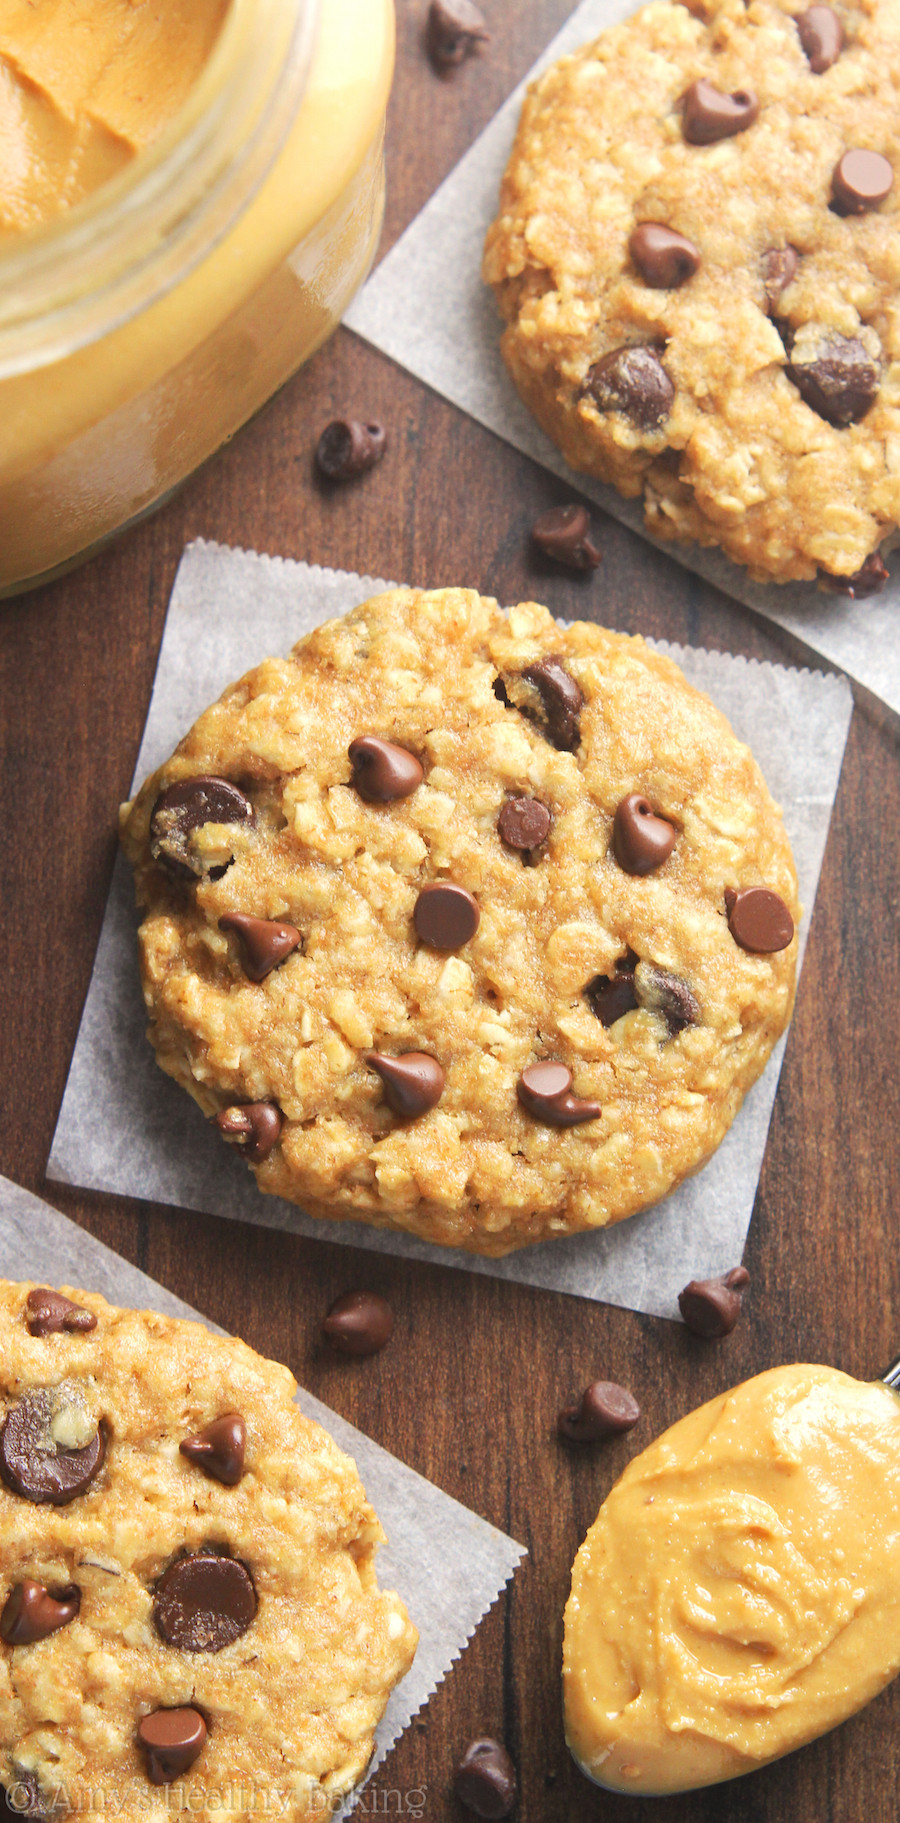 Healthy Peanut Butter Oatmeal Chocolate Chip Cookies
 healthy peanut butter oatmeal cookies